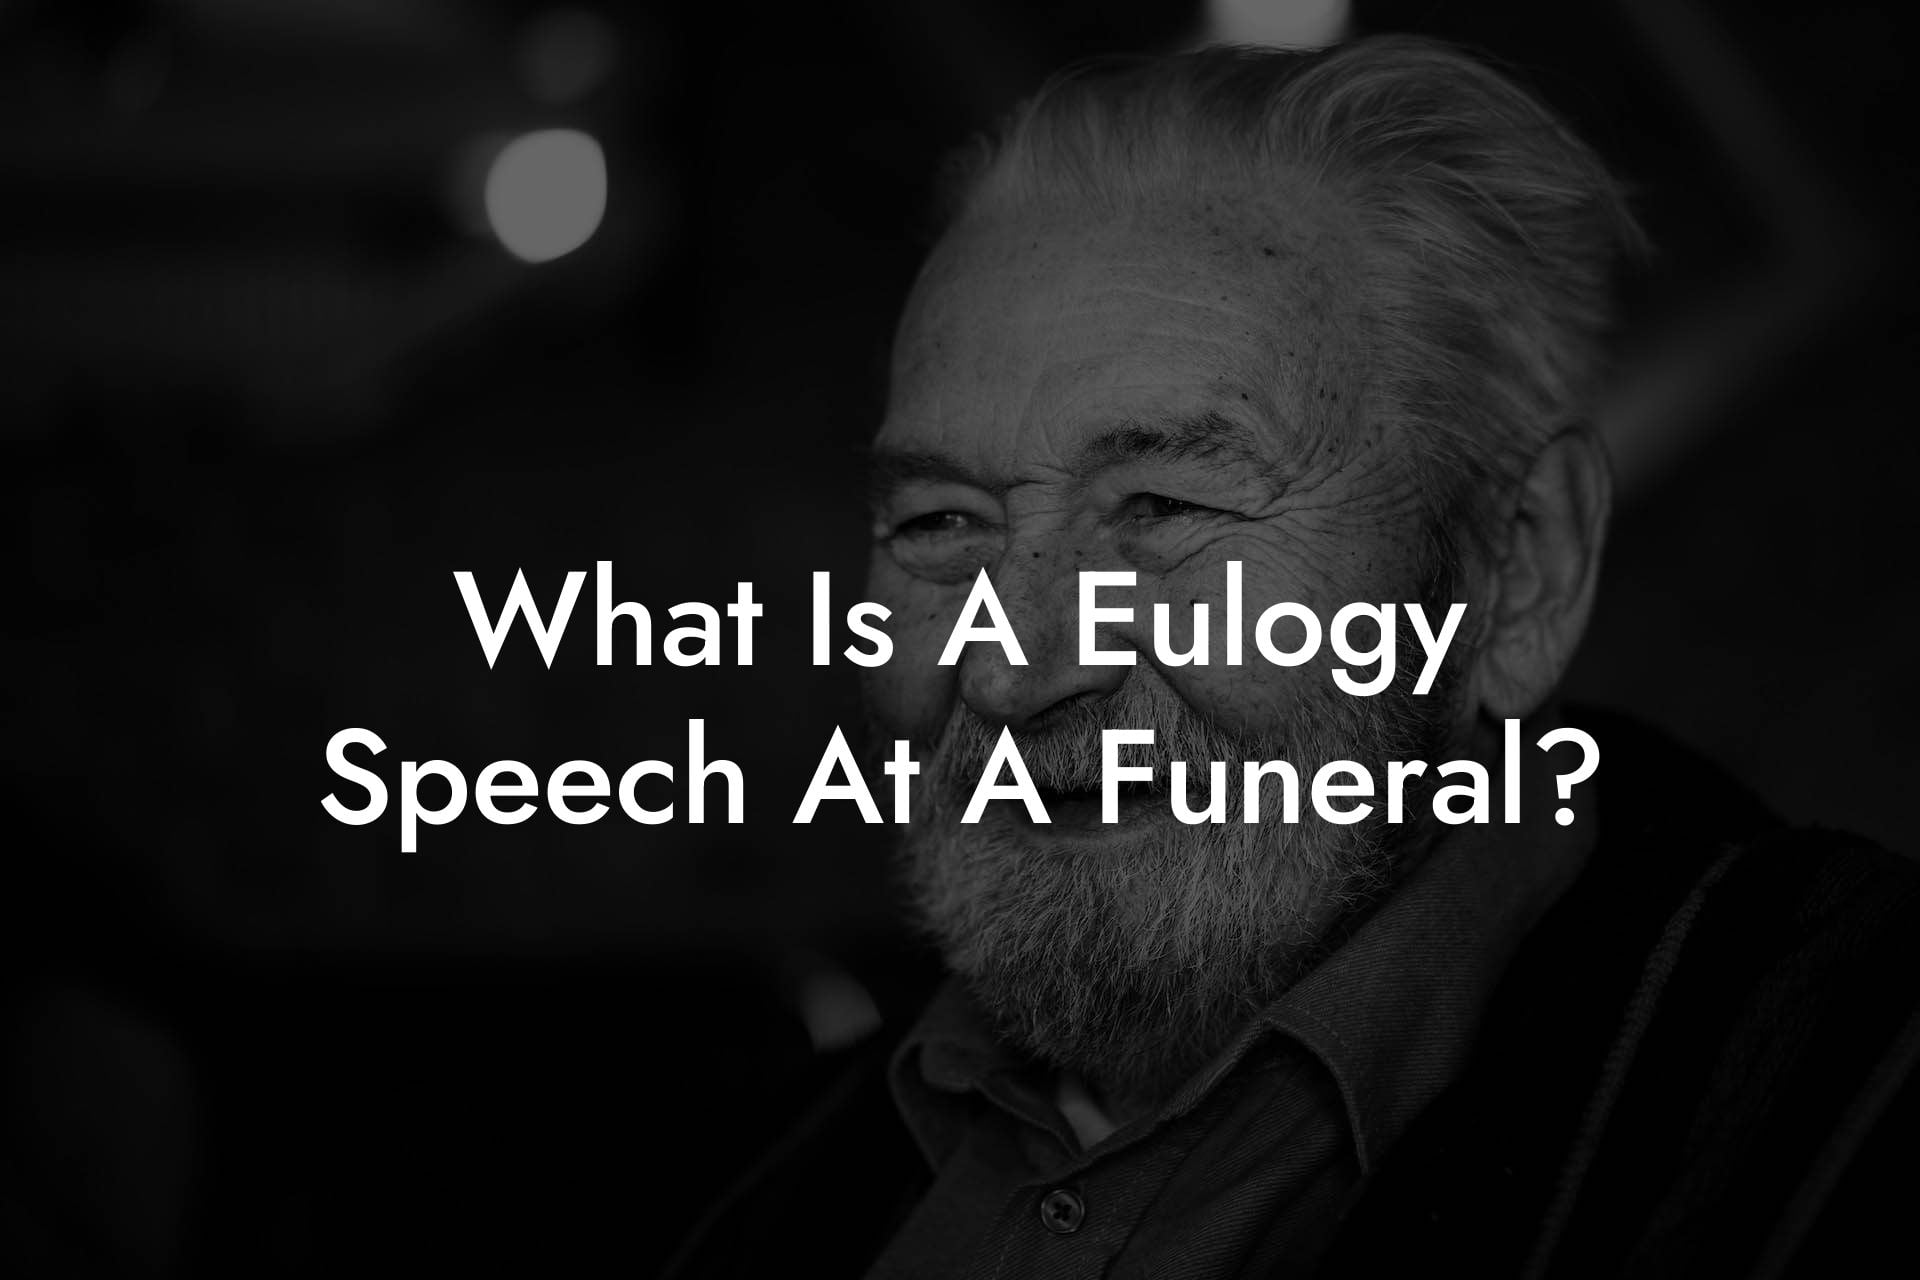 What Is A Eulogy Speech At A Funeral?